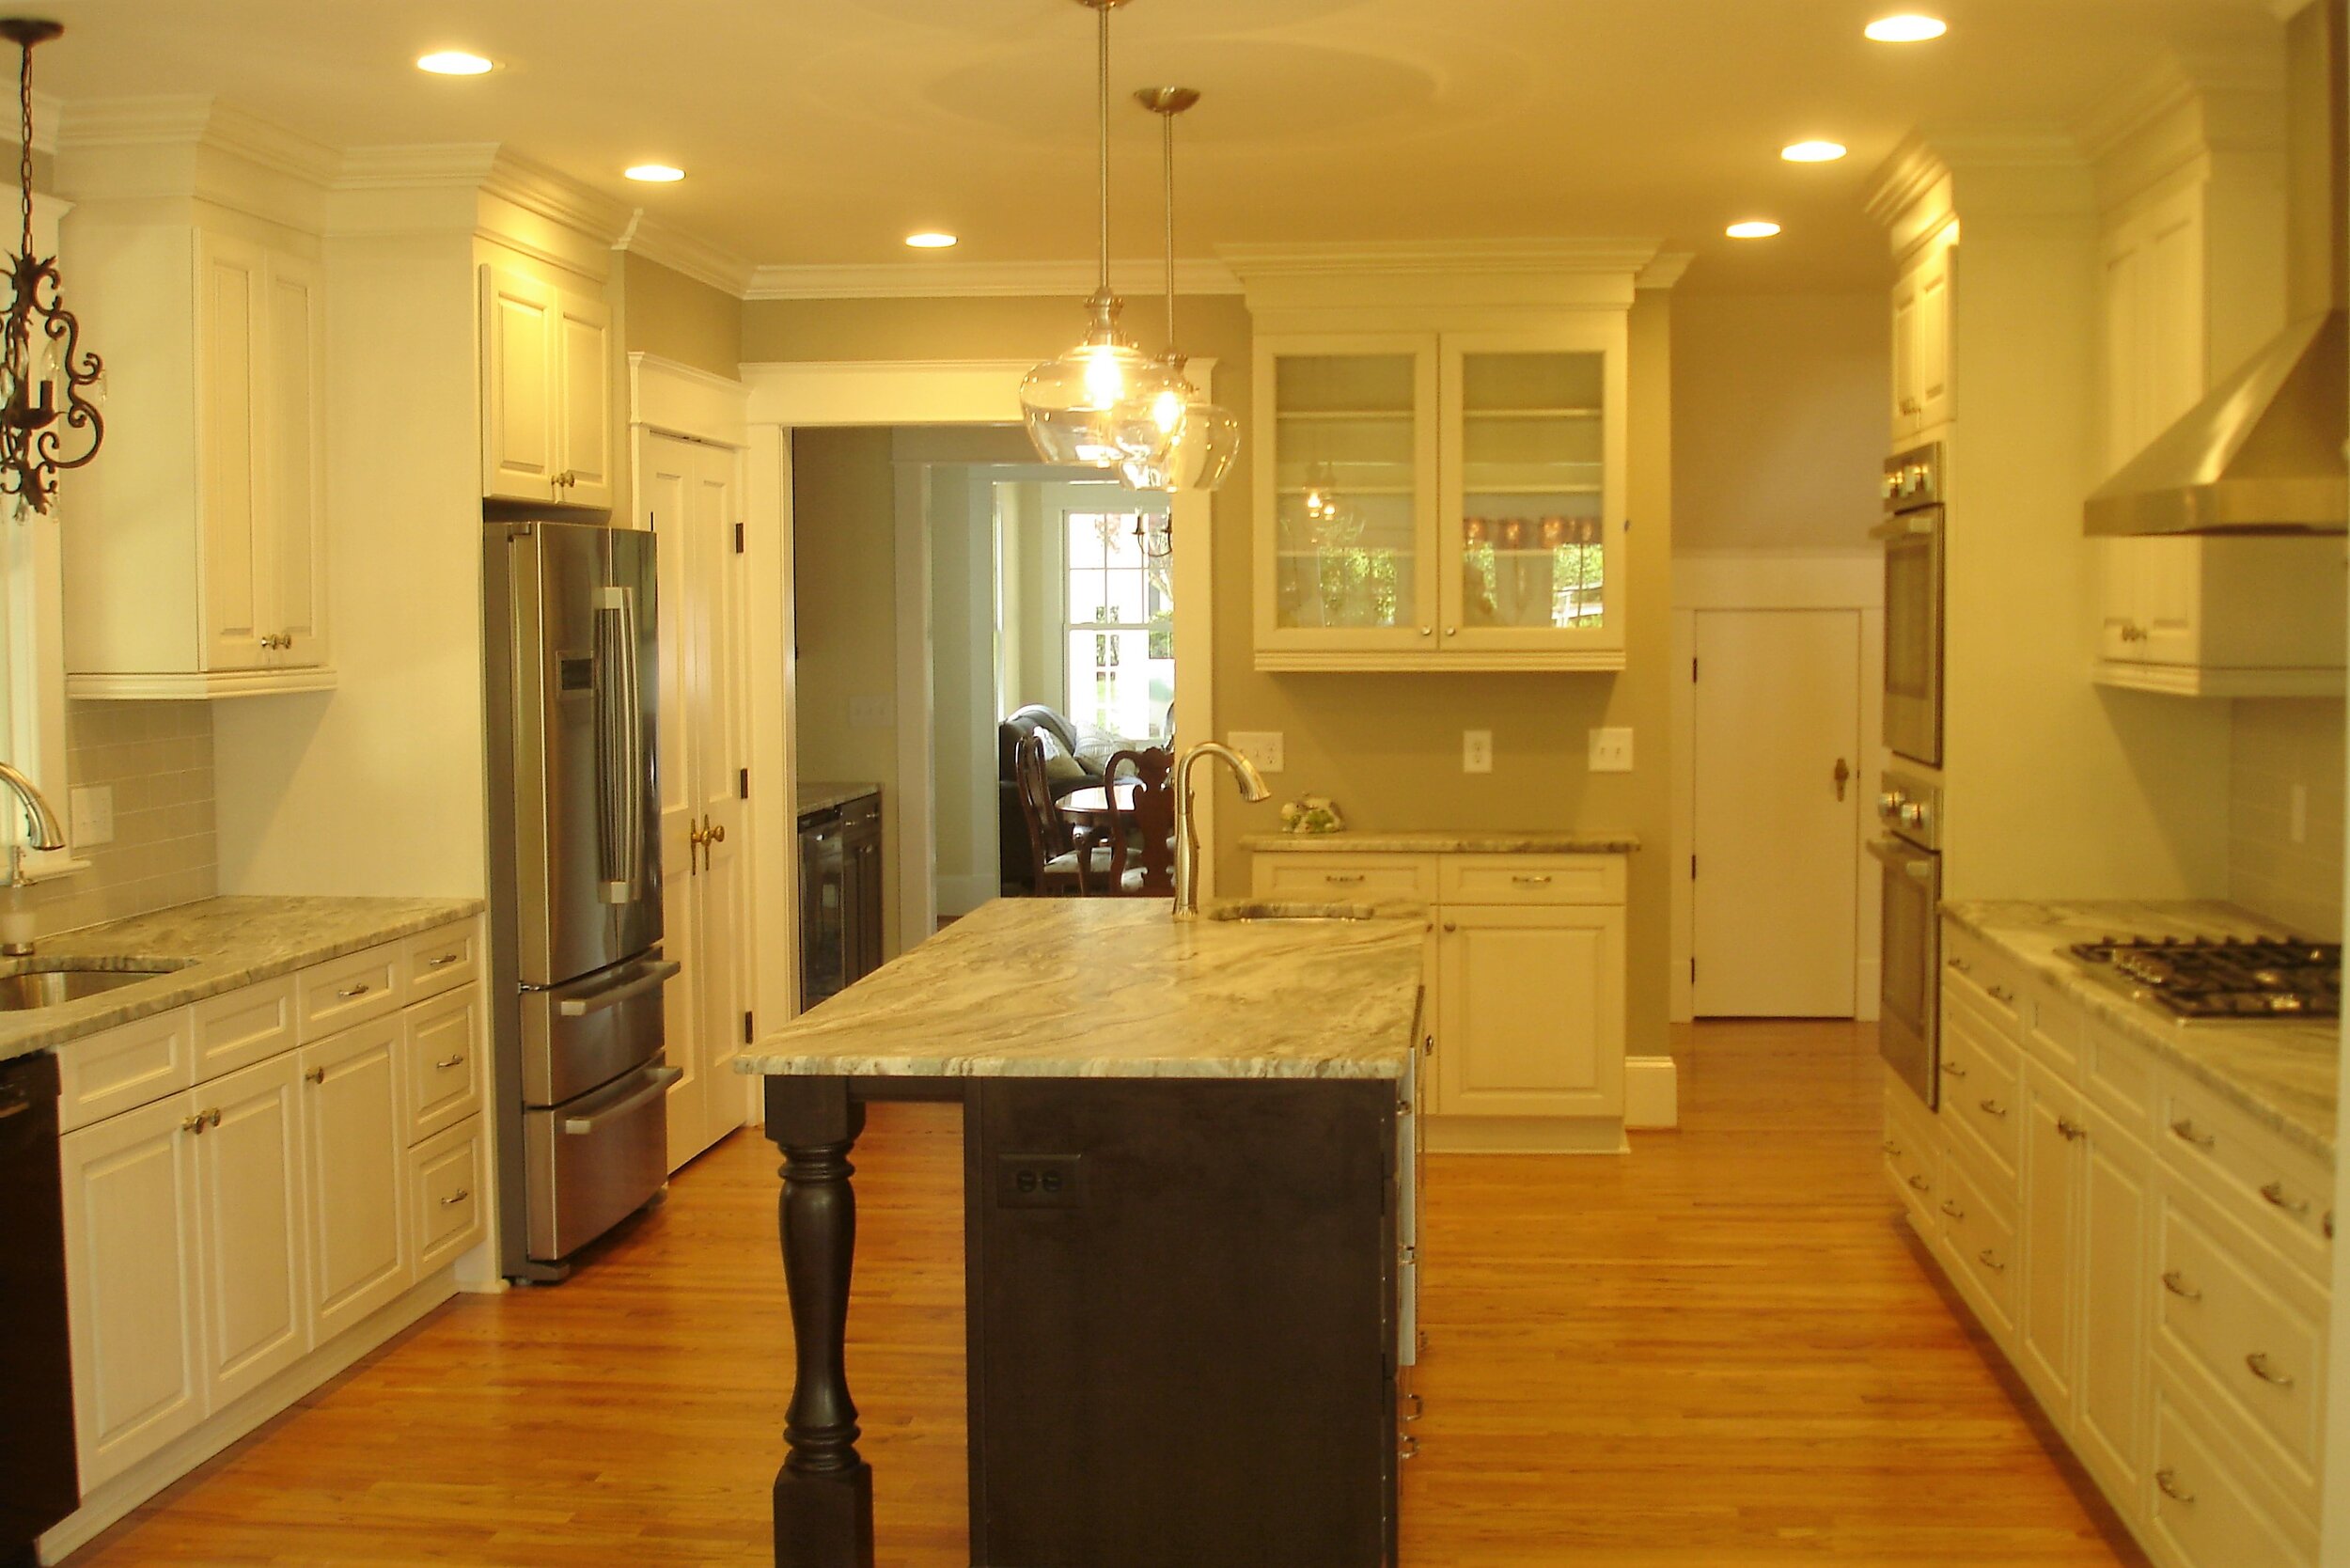 The kitchen features an island with seating and granite countertops with  a leathered finish.